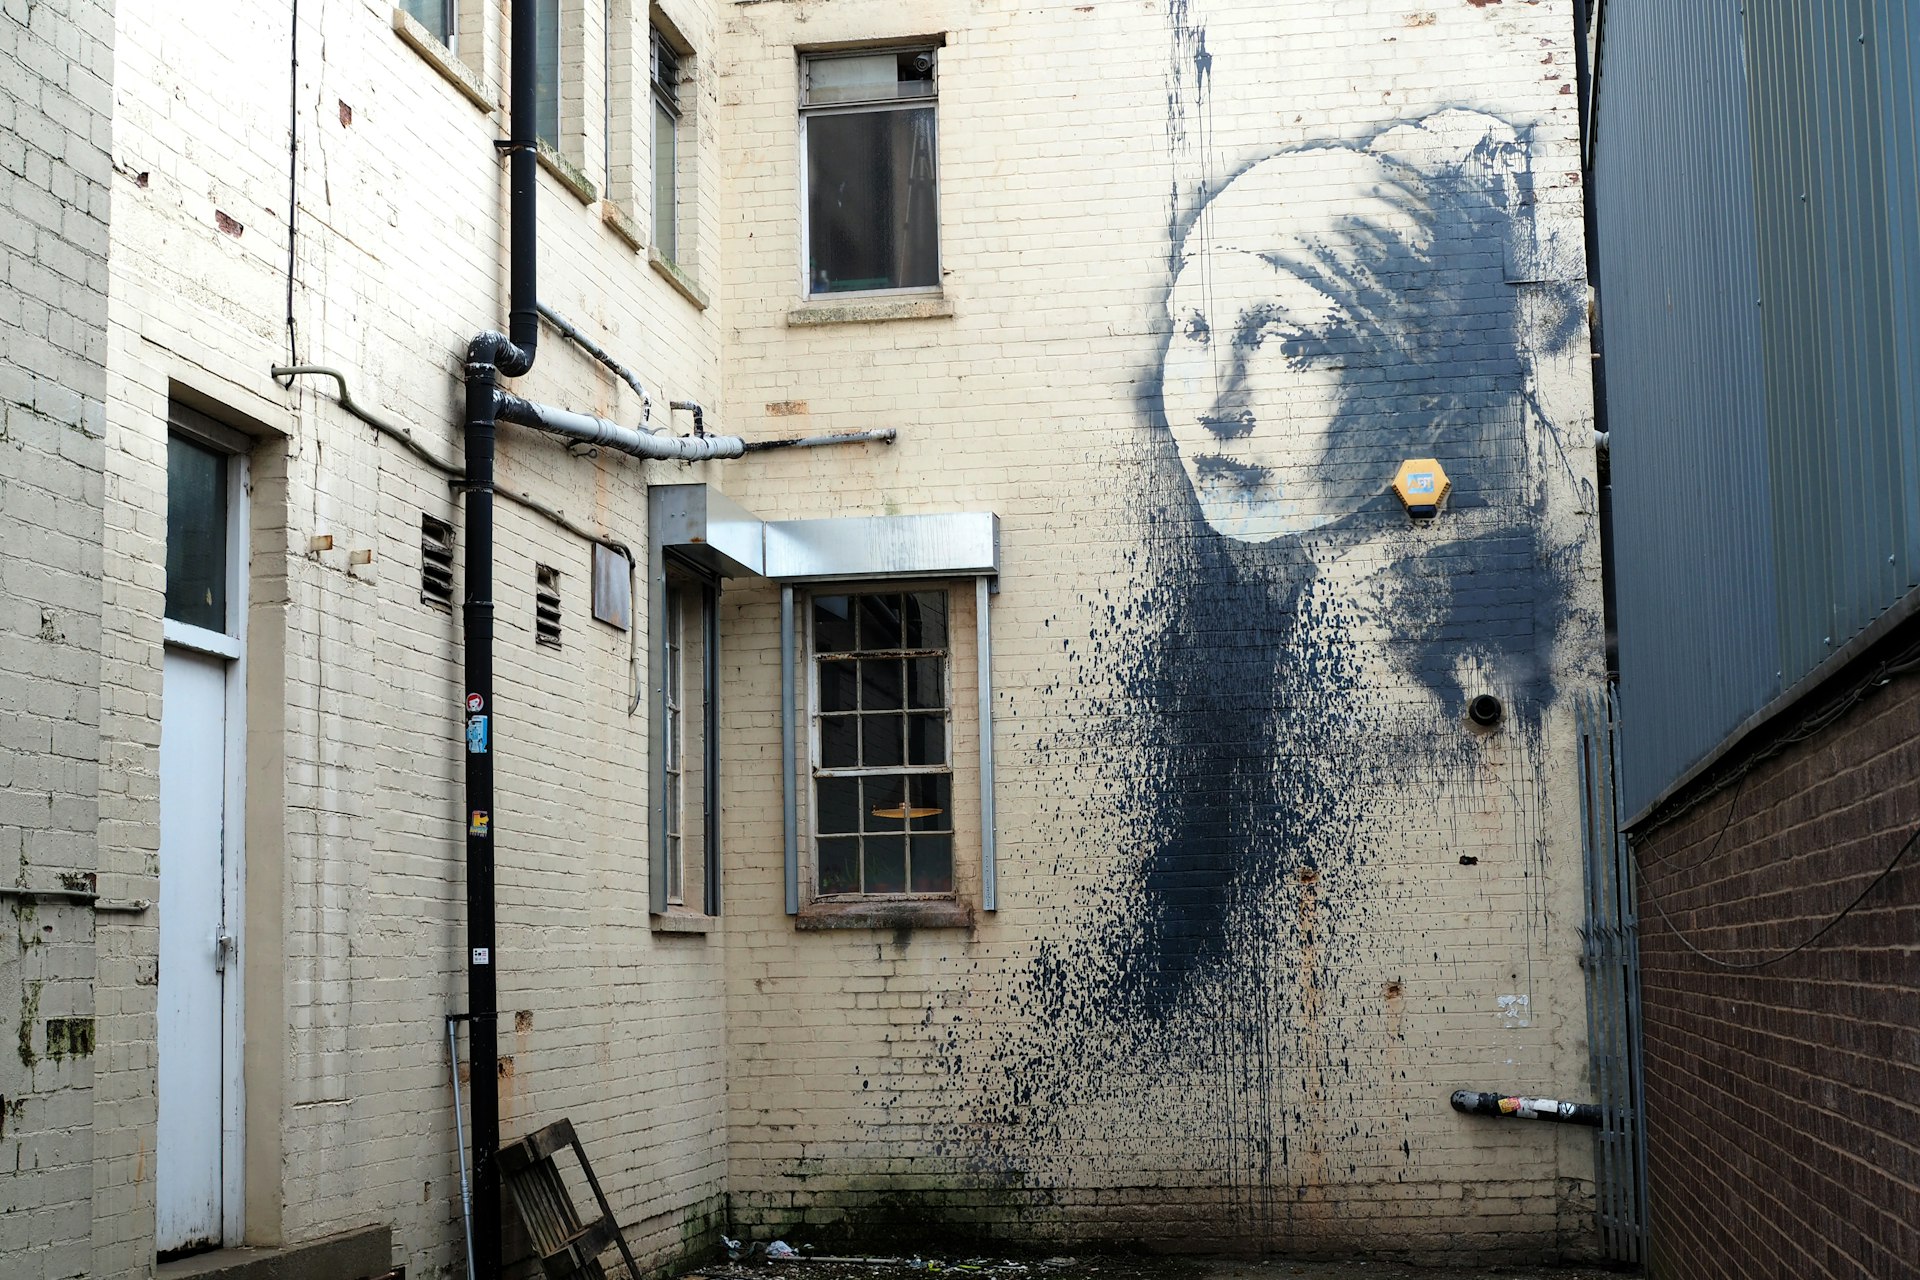 A white brick wall in an alley showing “Girl with Pierced Eardrum” by street artist Banksy